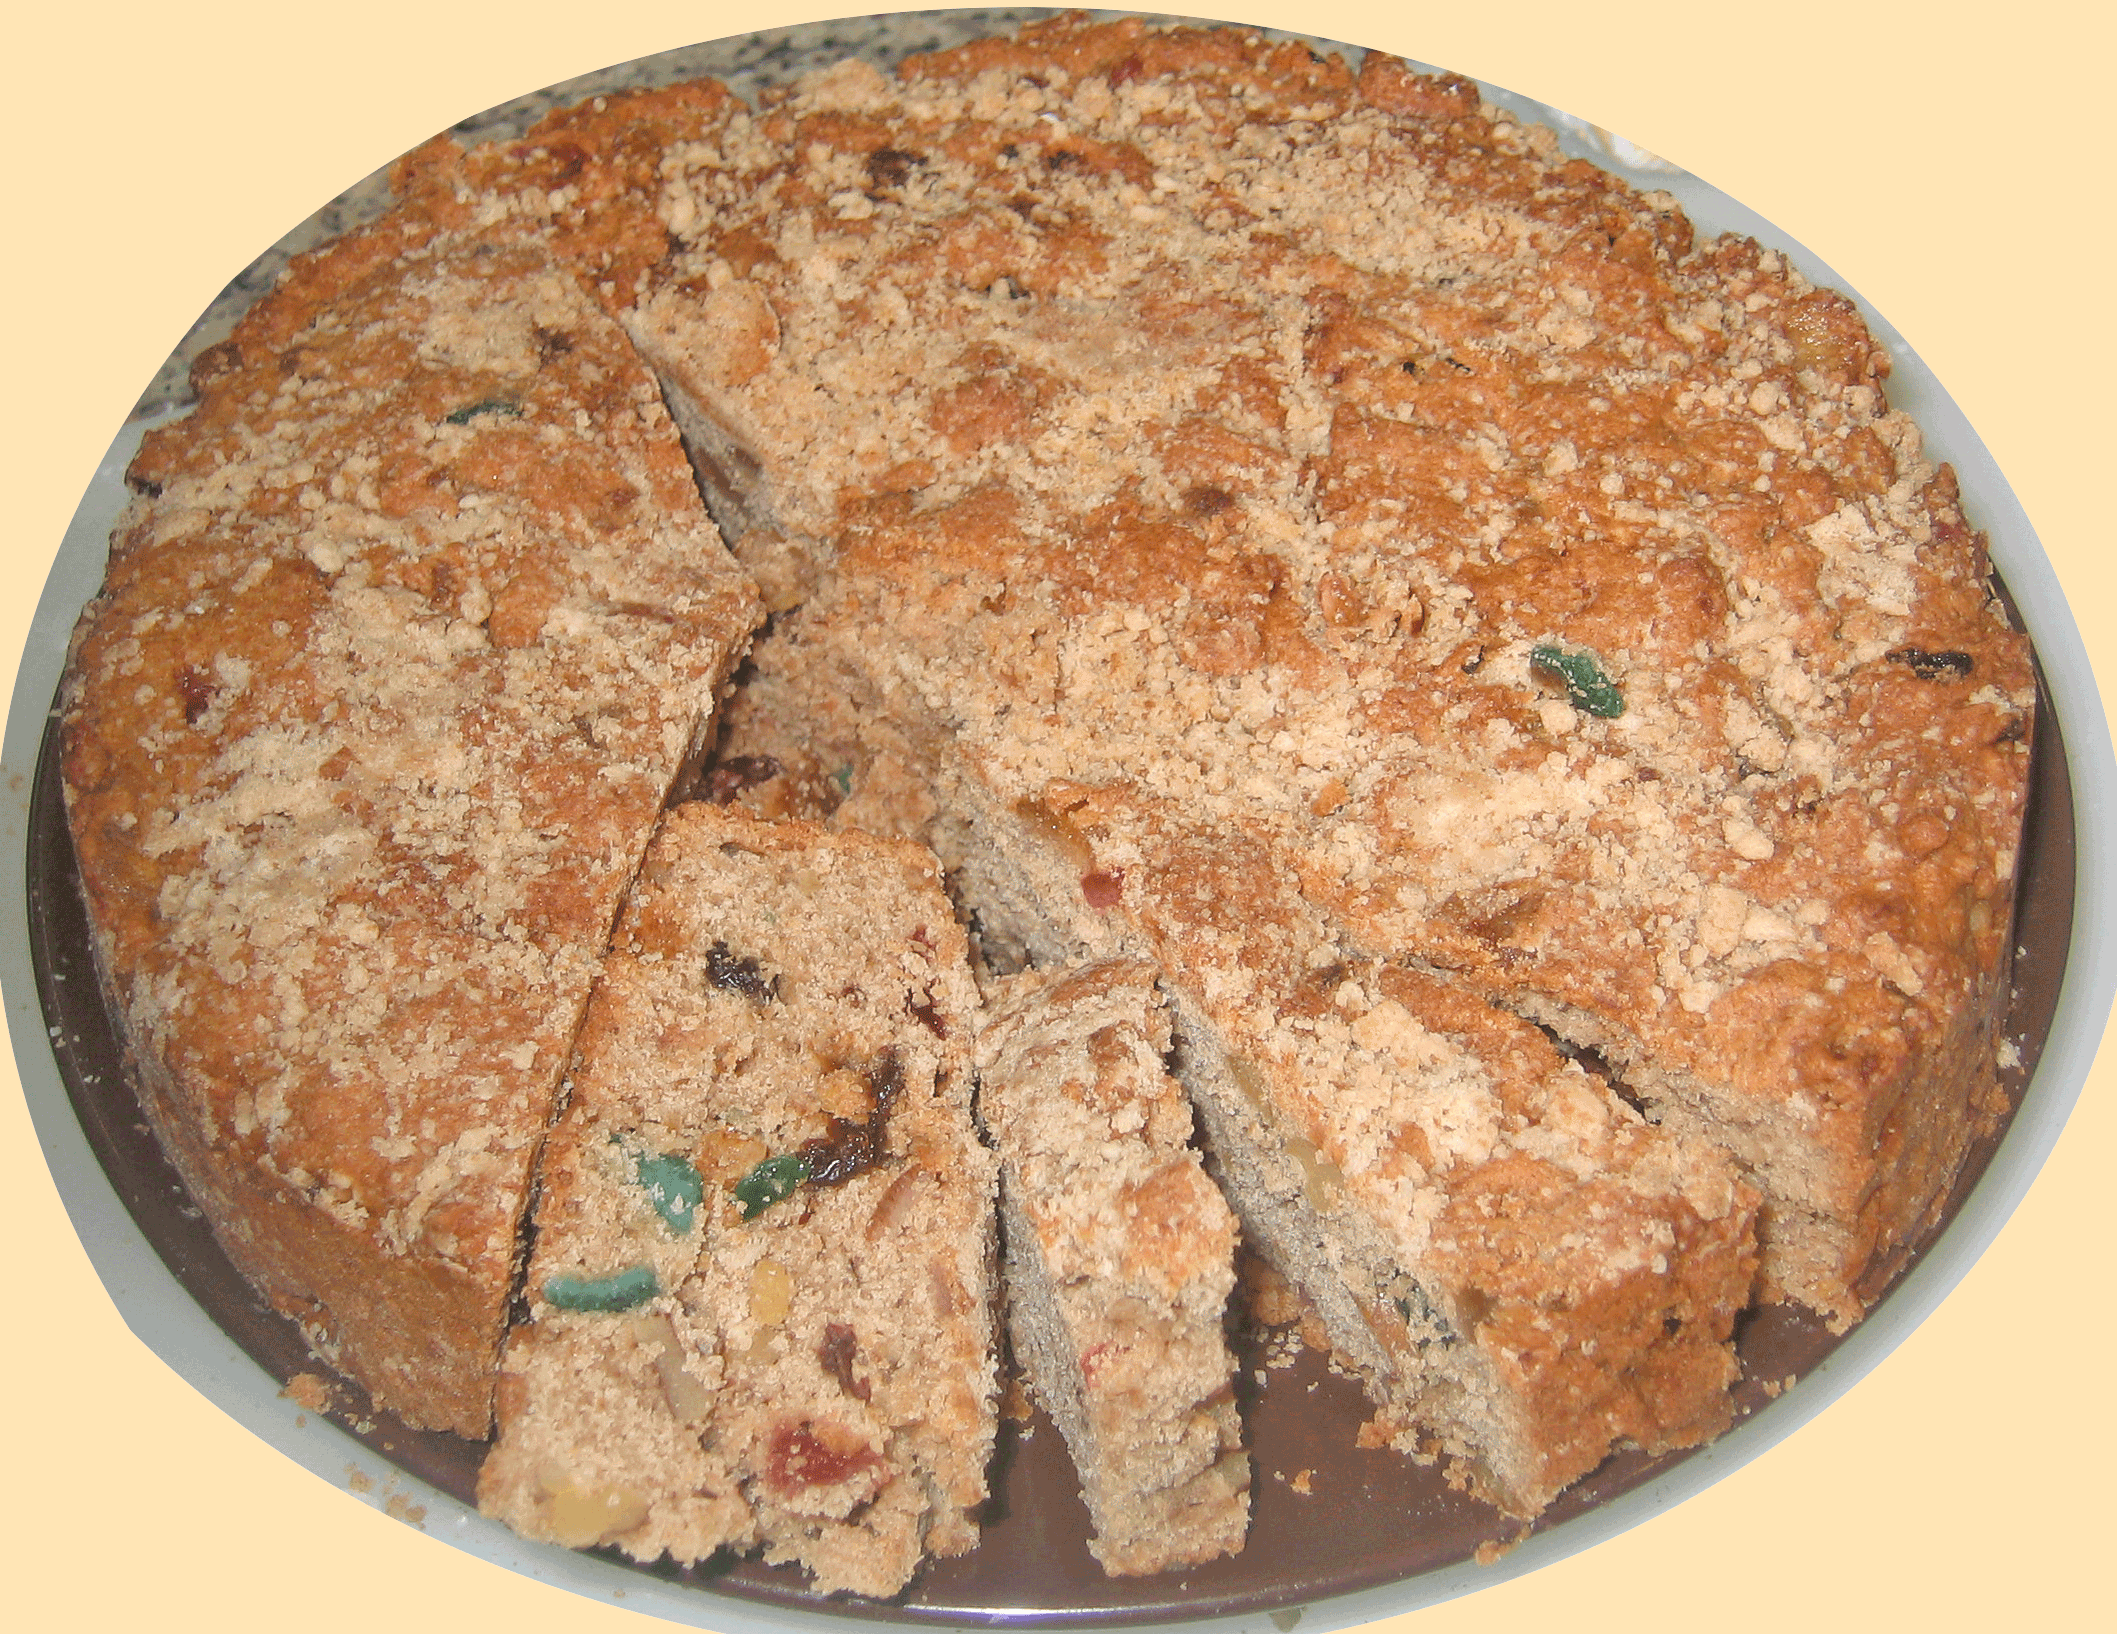  The large fruit cake with some slices as well